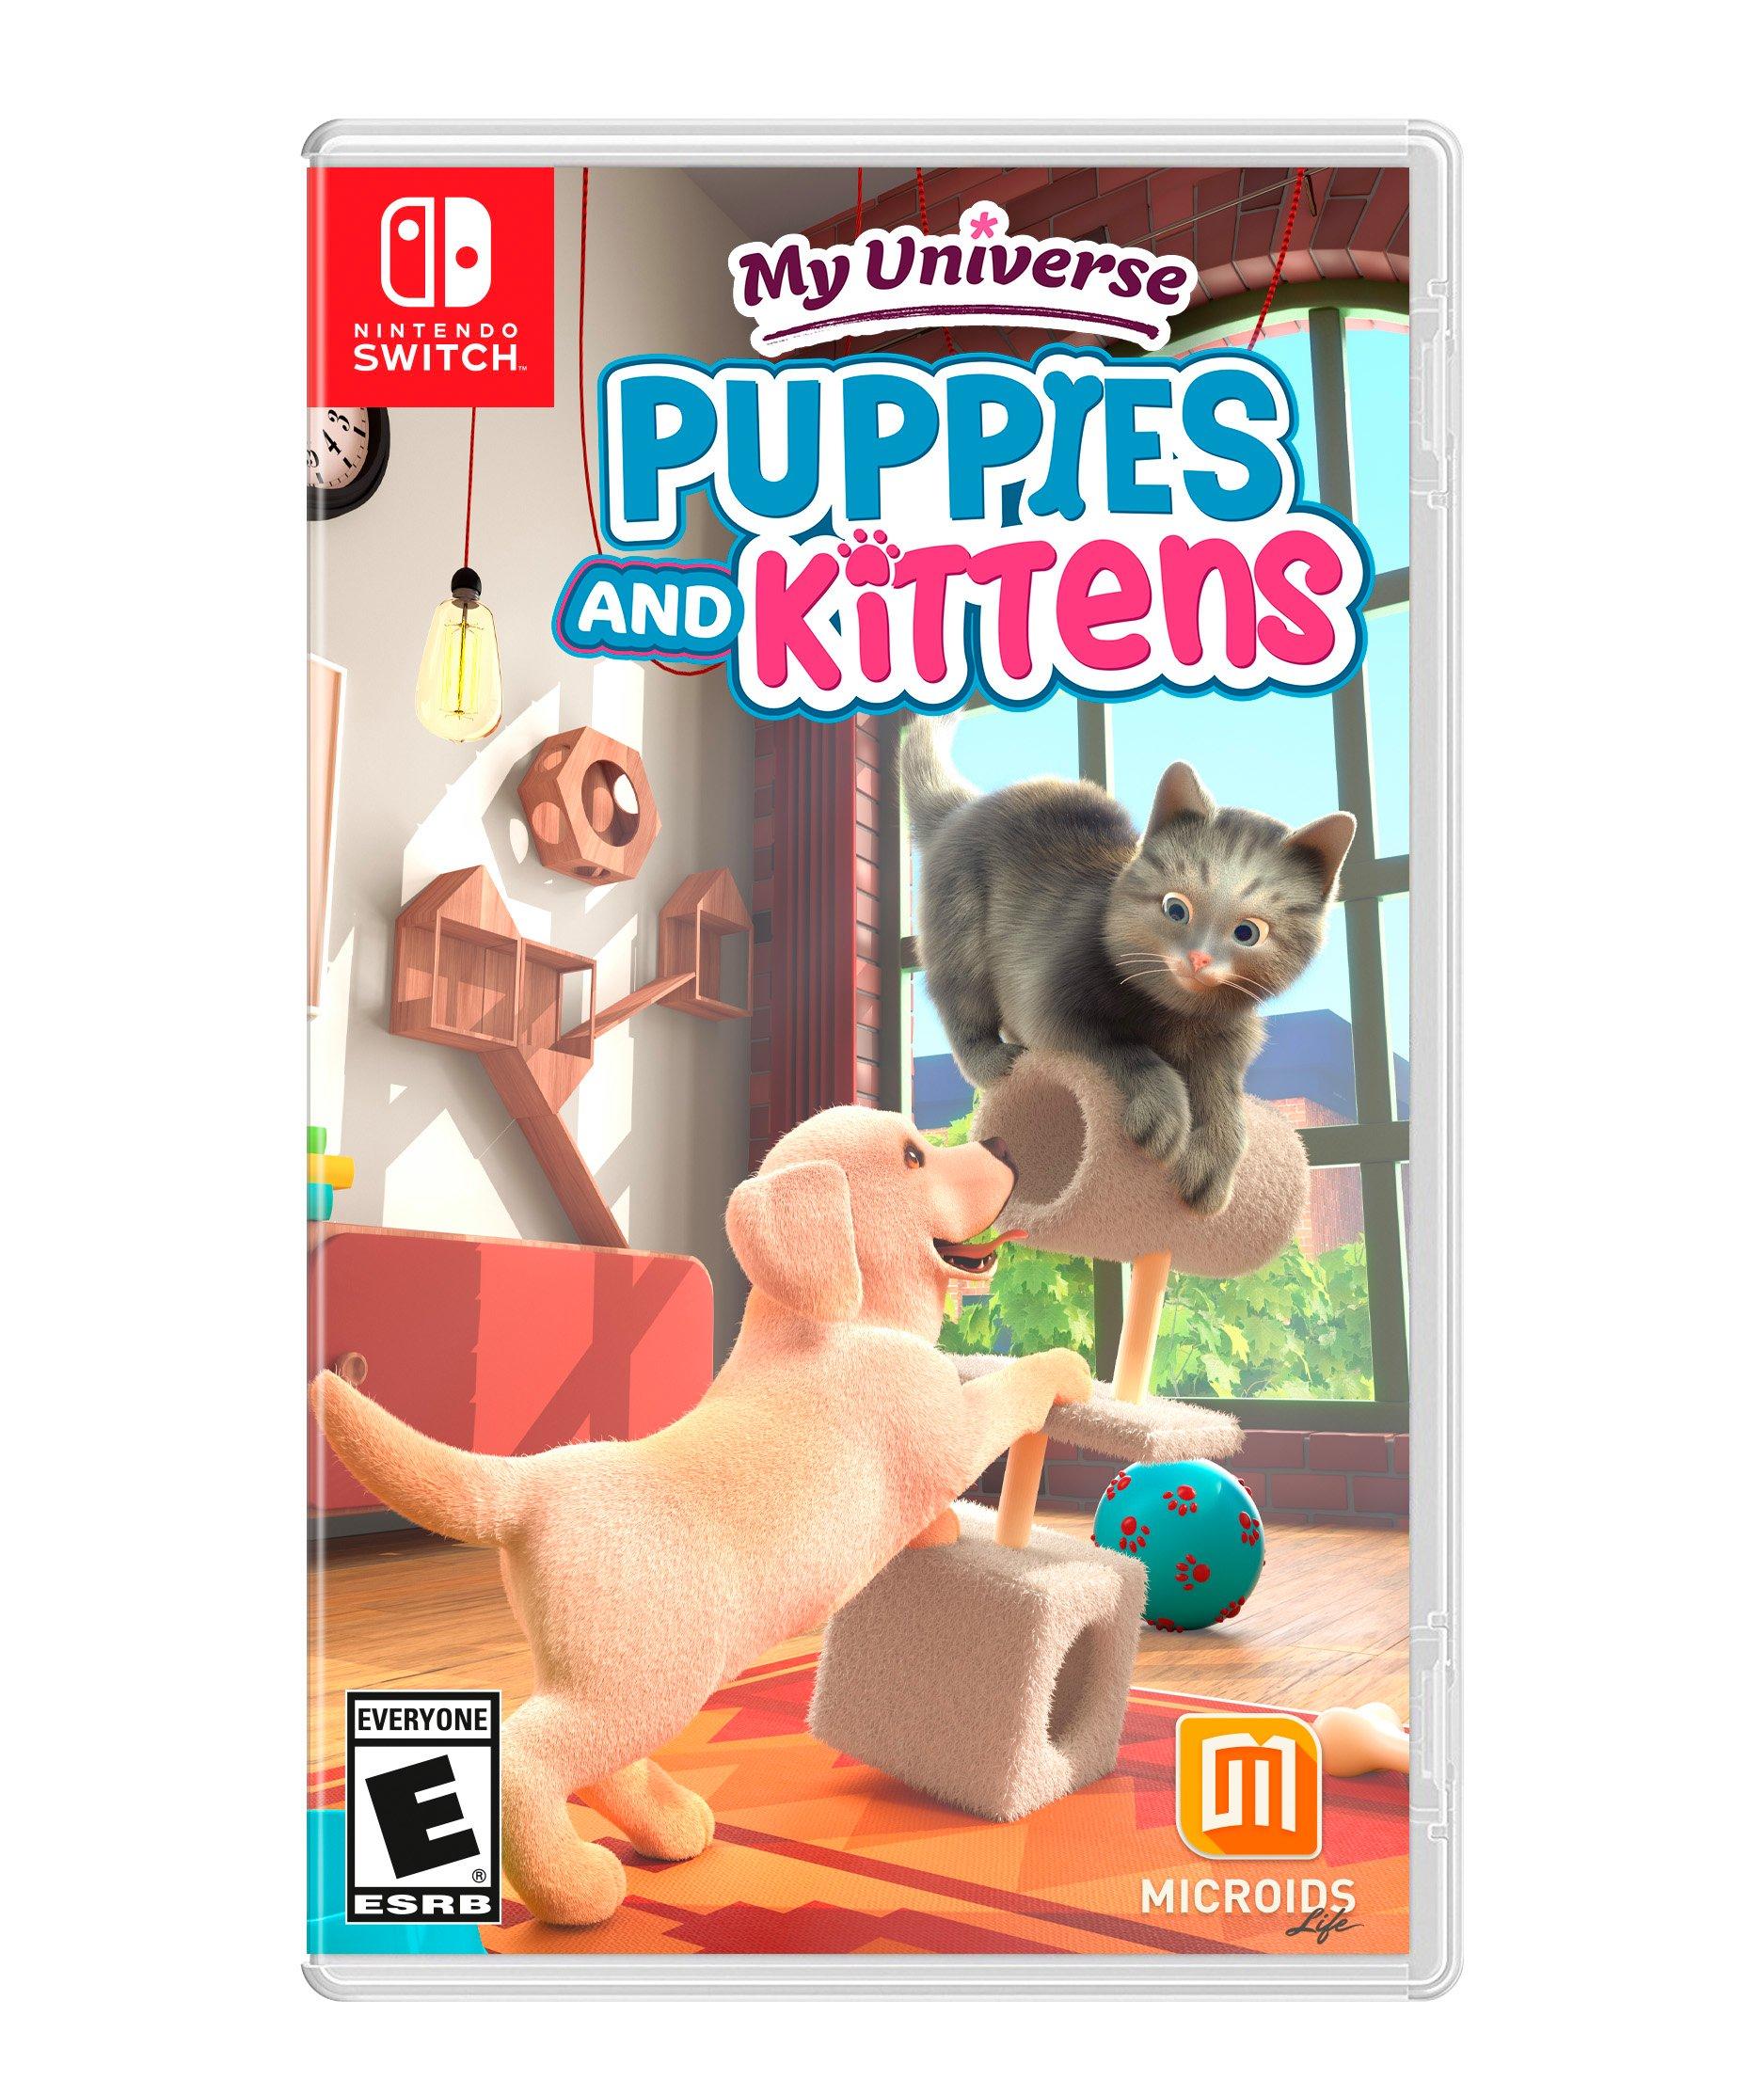 My Universe Pet Clinic, Maximum Games, PlayStation 4, [Physical